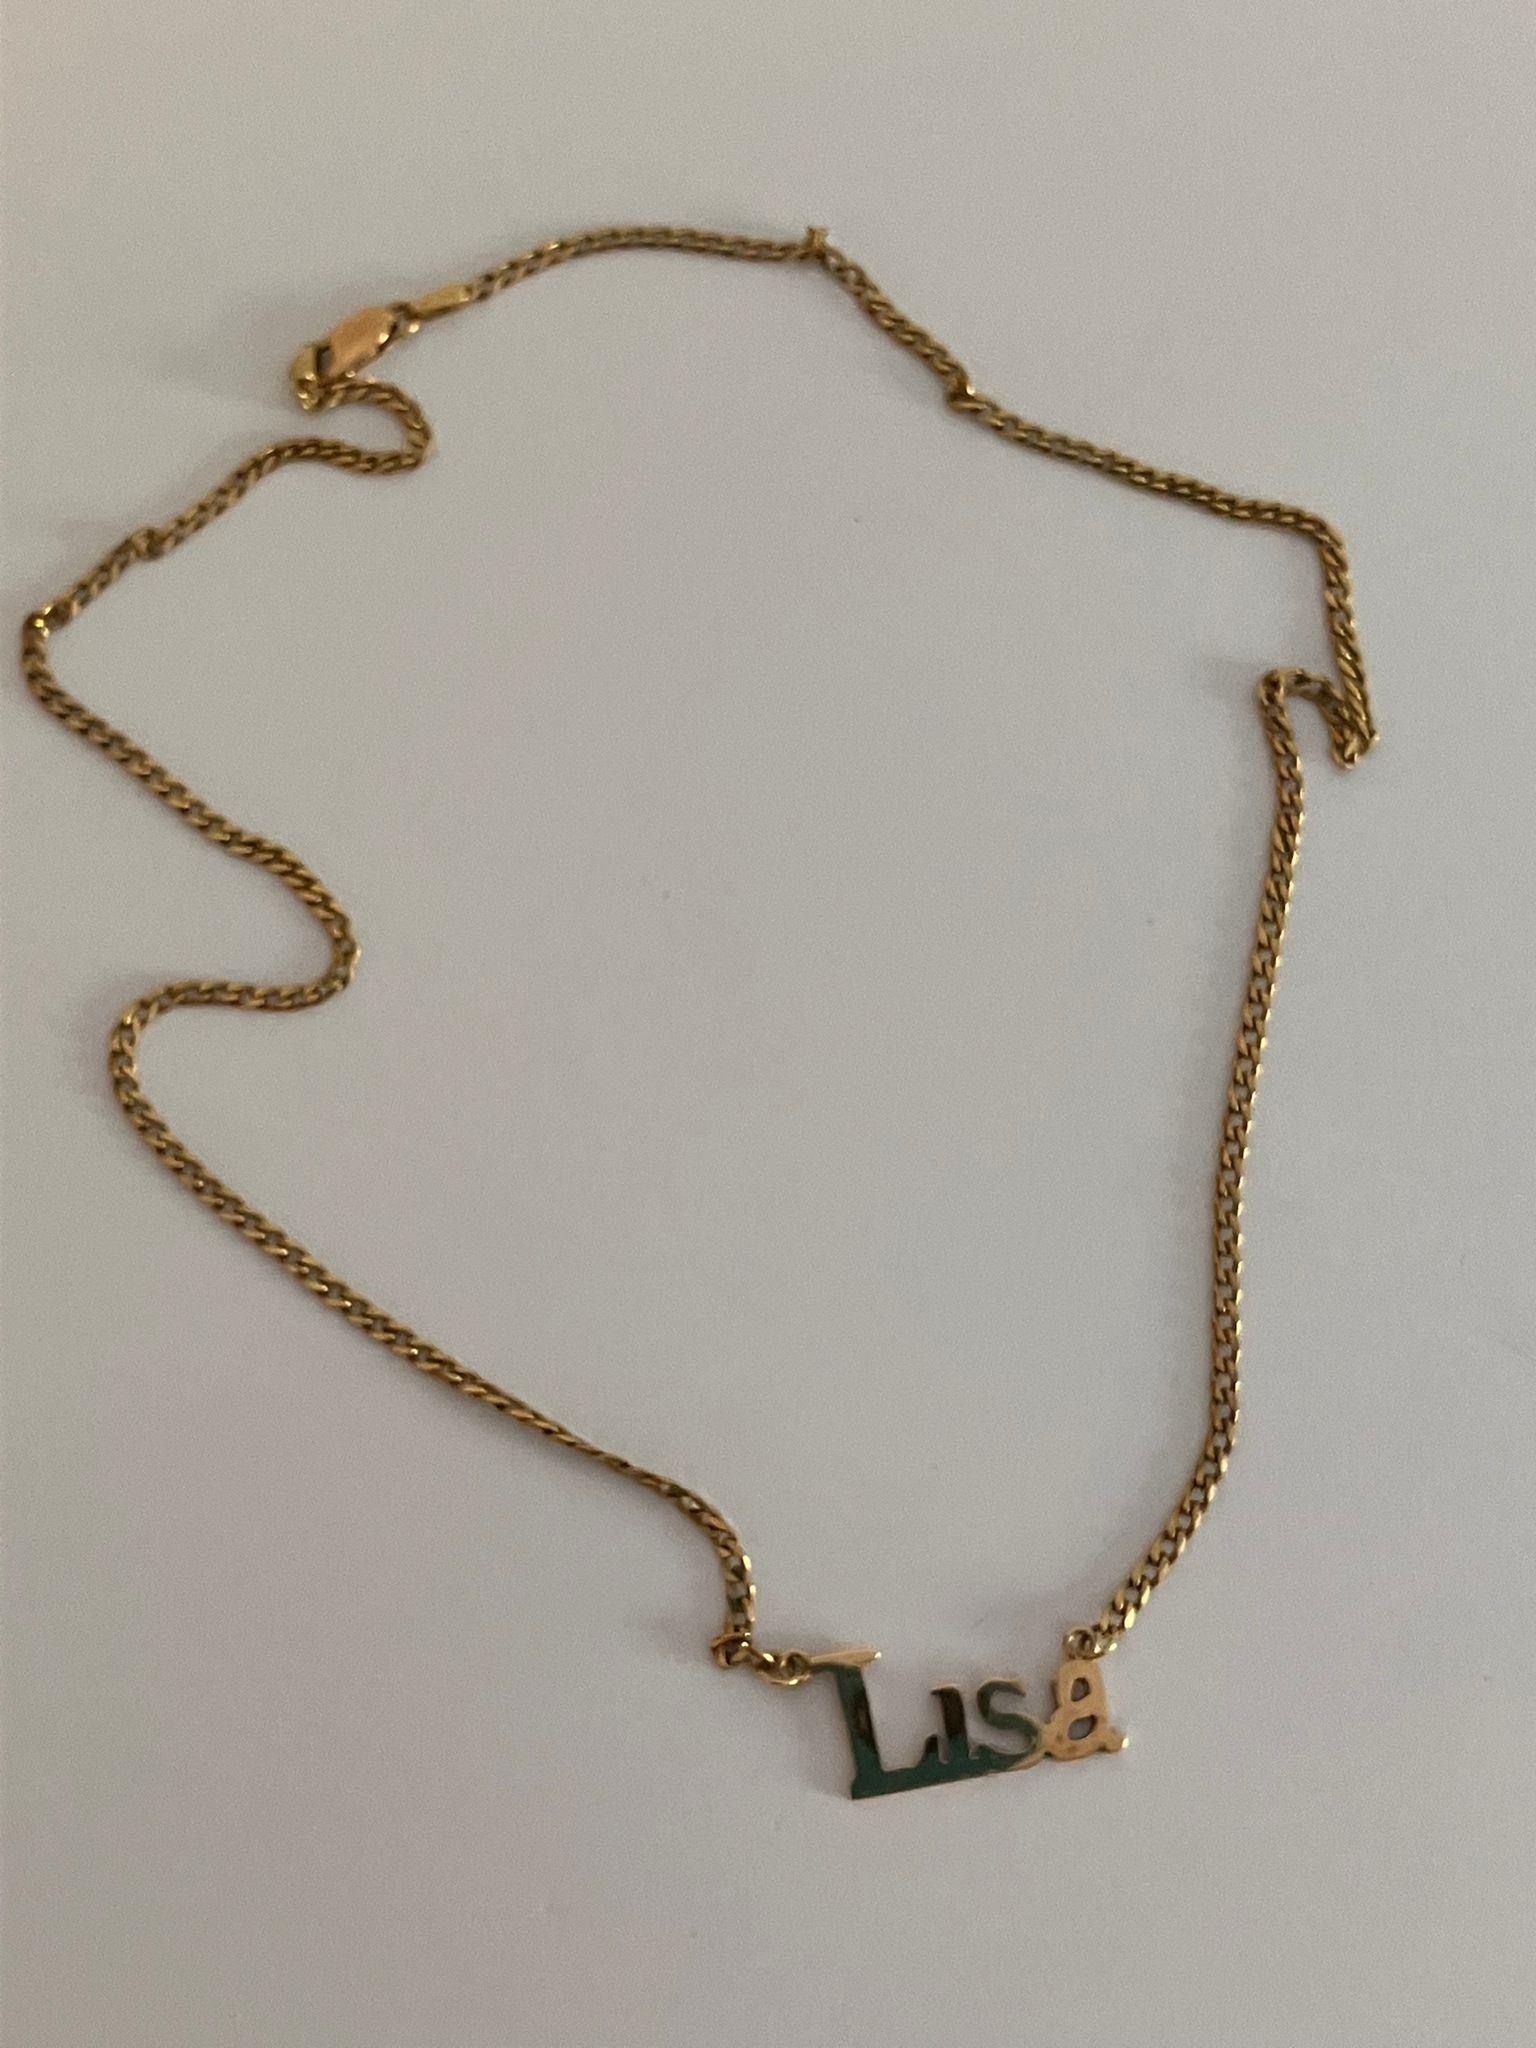 9 carat GOLD, CURB CHAIN NECKLACE with name of LISA. Full UK hallmark. 5.7 grams. 46 cm. - Image 10 of 11